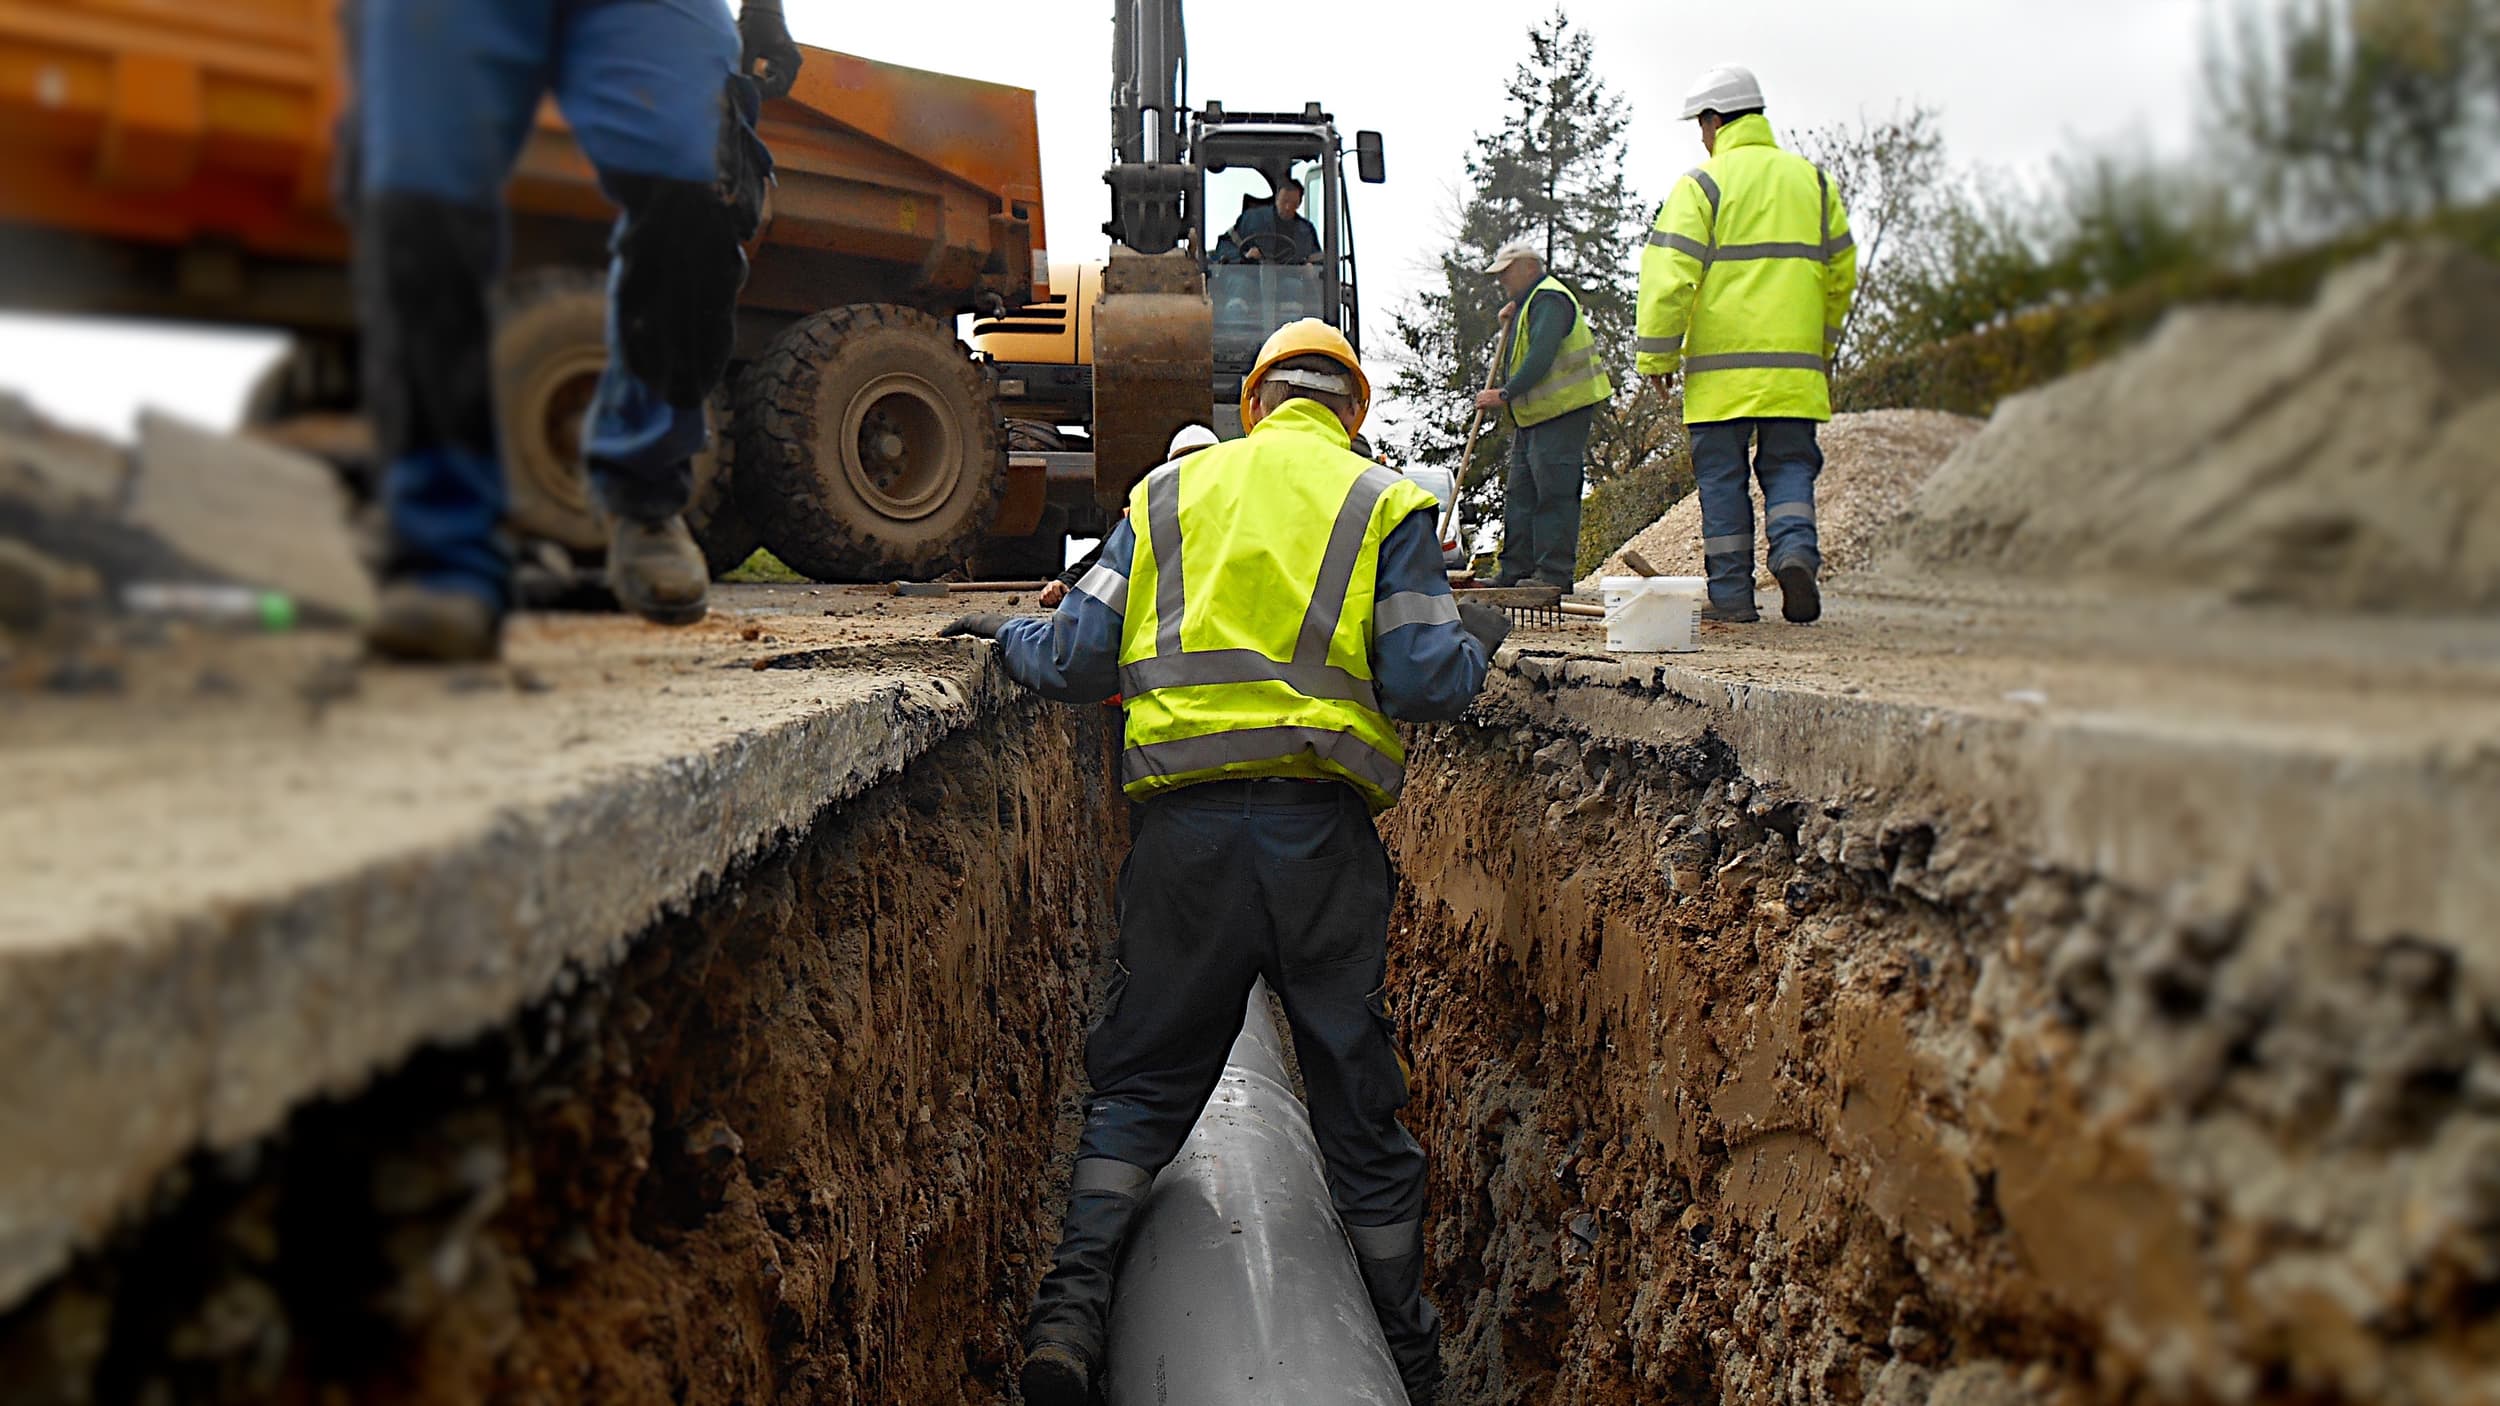 Compliance Training Online Trenching & Excavation Safety course